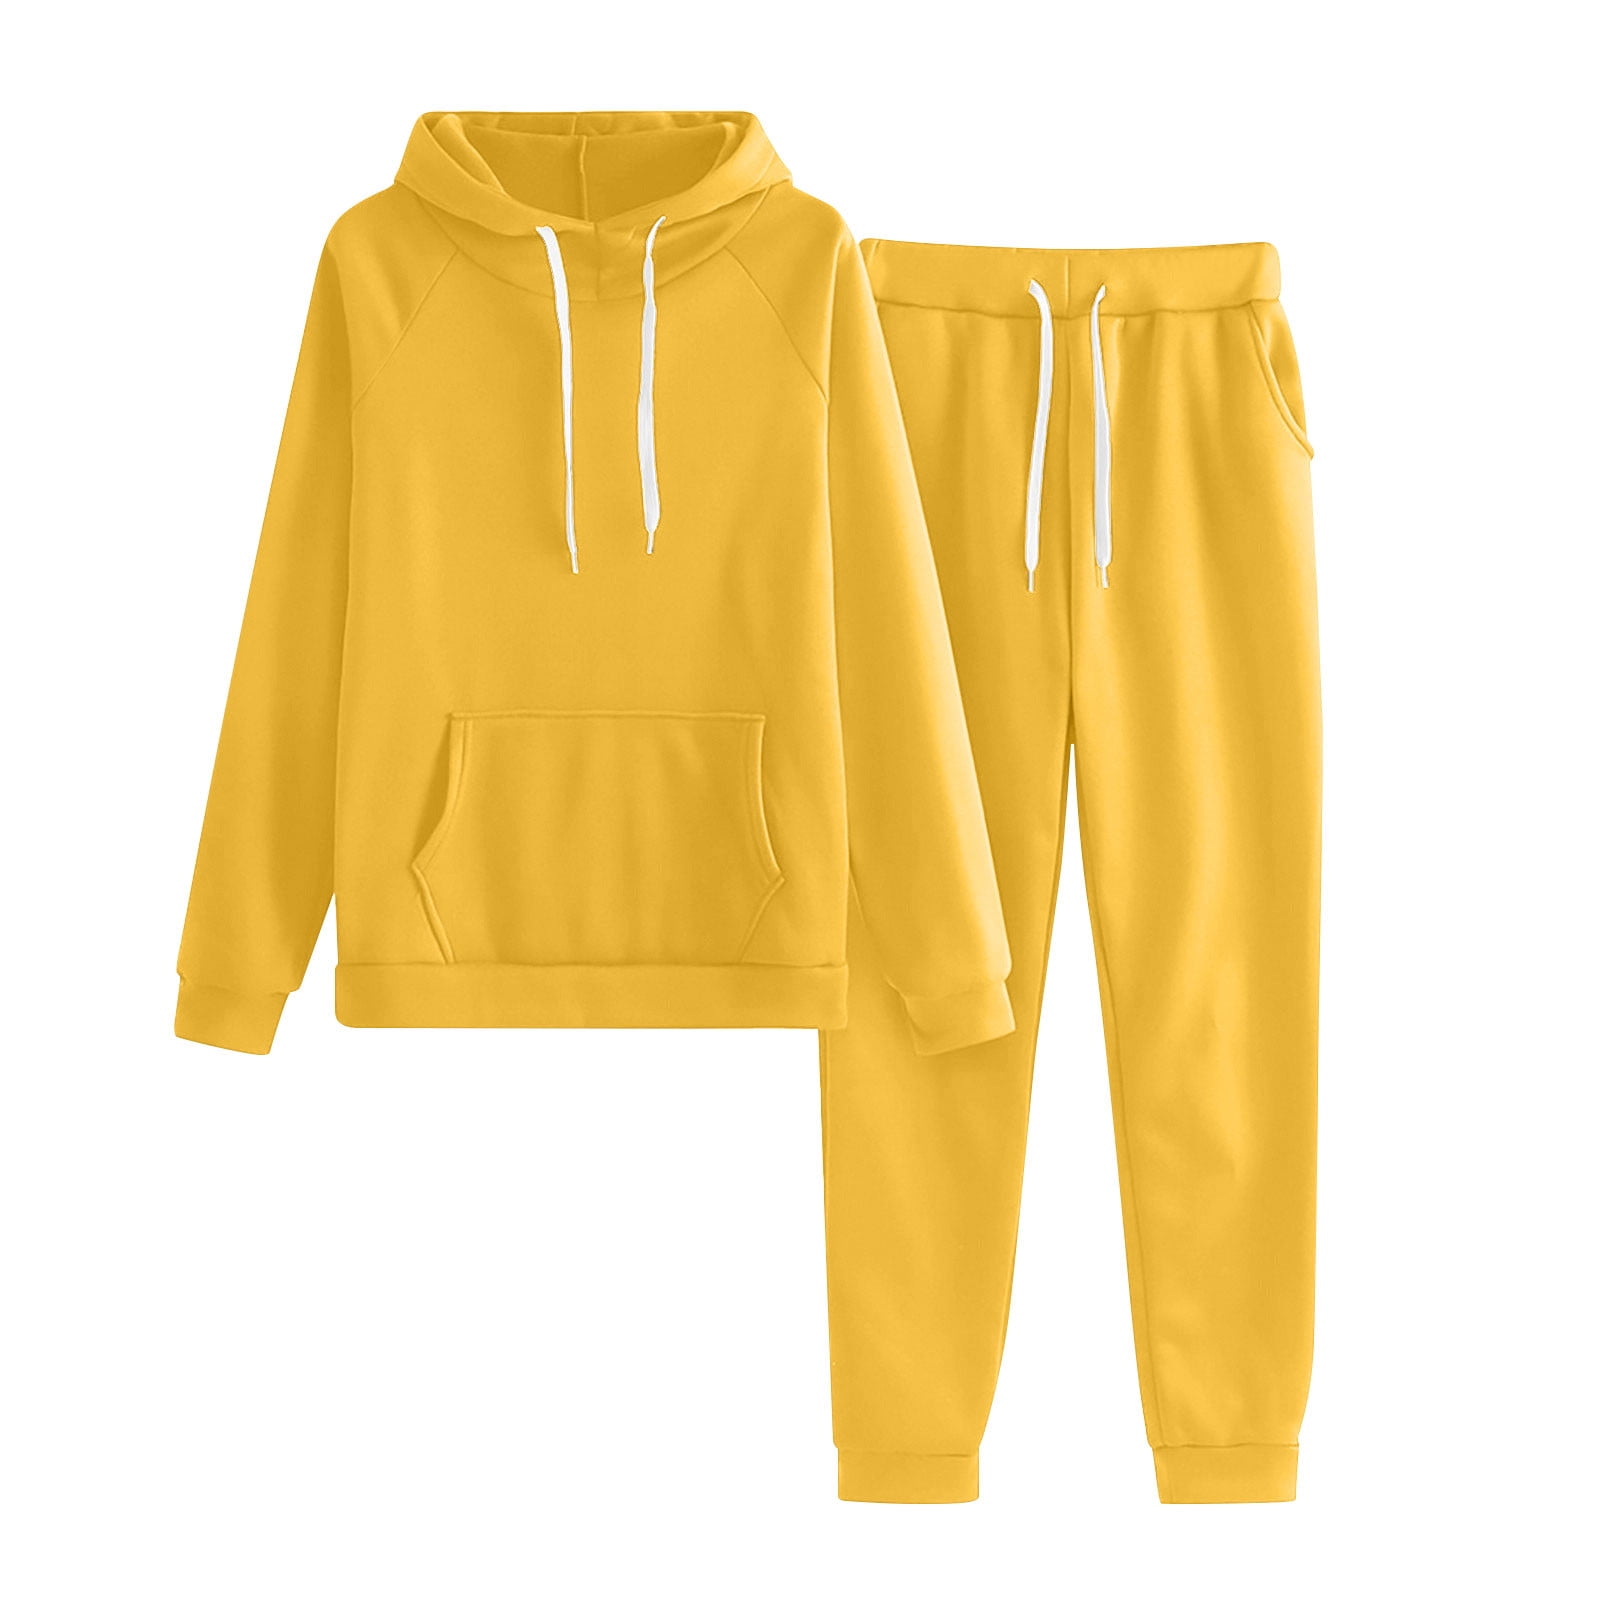 Women Jogger Outfit Matching Sweat Suits Long Sleeve Hooded Sweatshirt ...